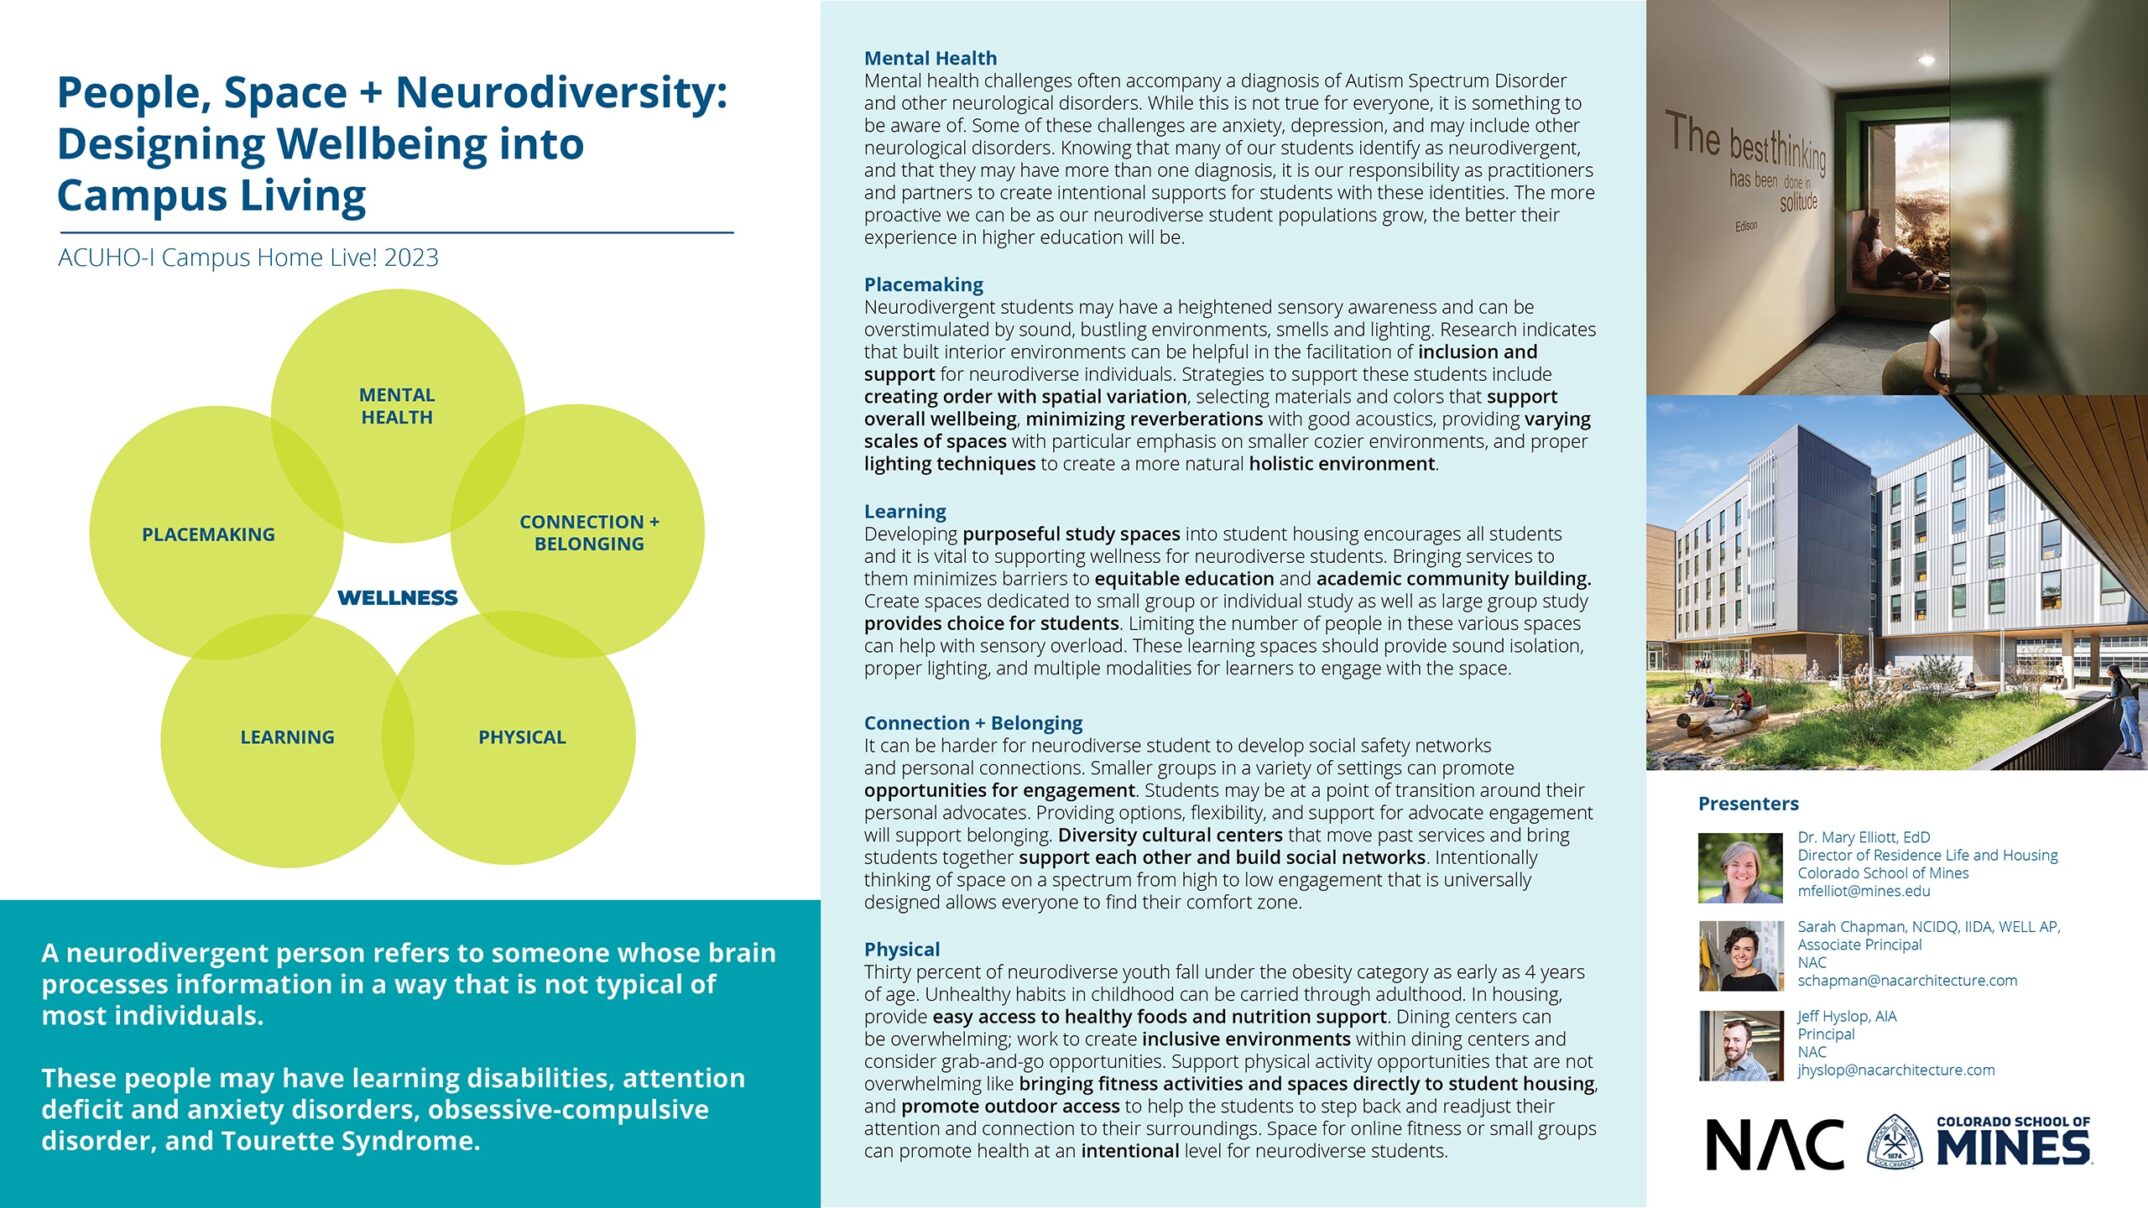 Resource guide for the NAC ACUHO-I presentation “People, Space + Neurodiversity: Designing Wellbeing into Campus Living.”